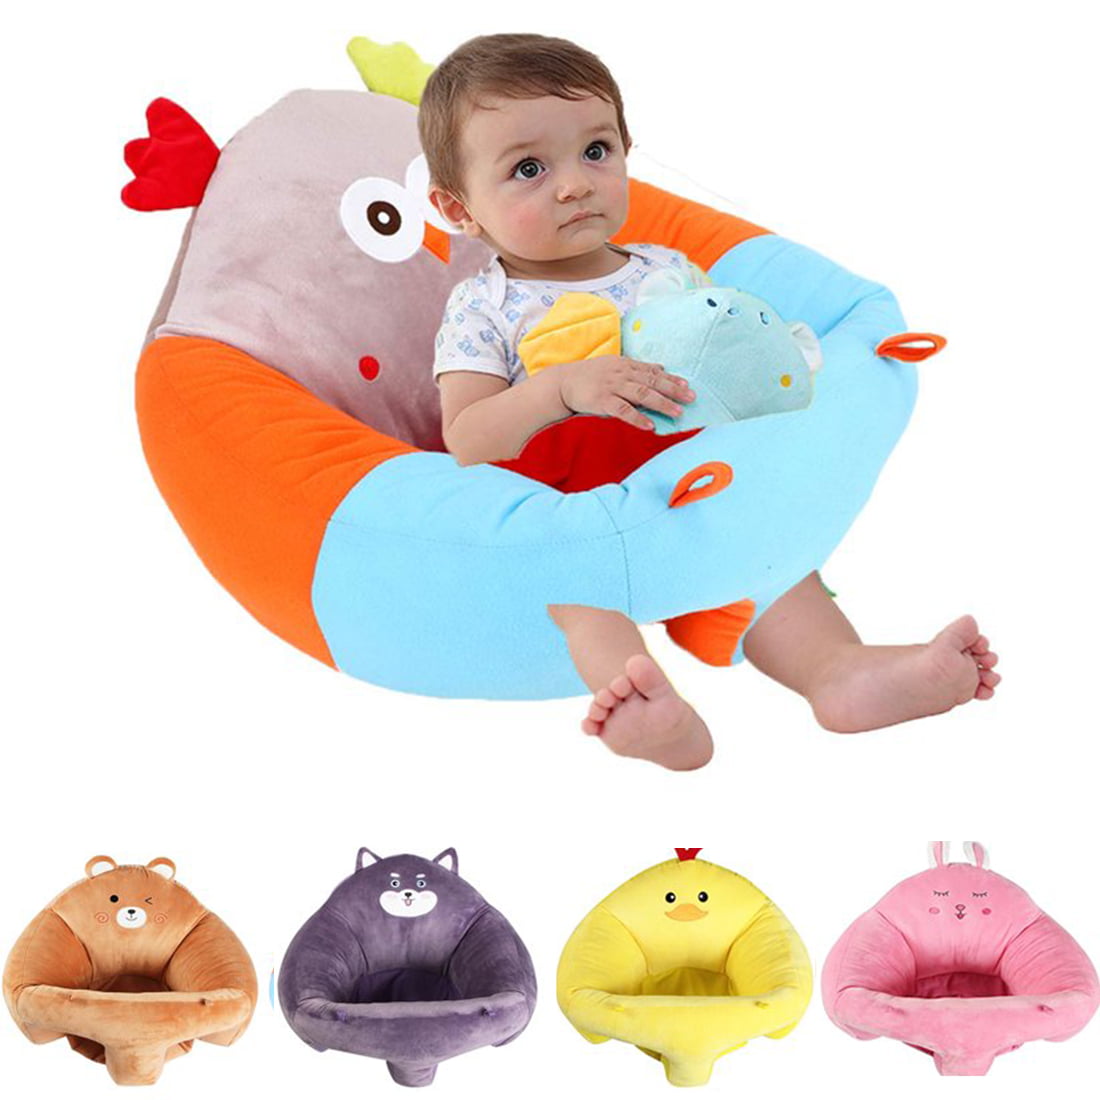 Suines Soft Baby Back Support Seat Sofa Baby Sitting Learning Sofa Chair for Newborn 0-3 Months 